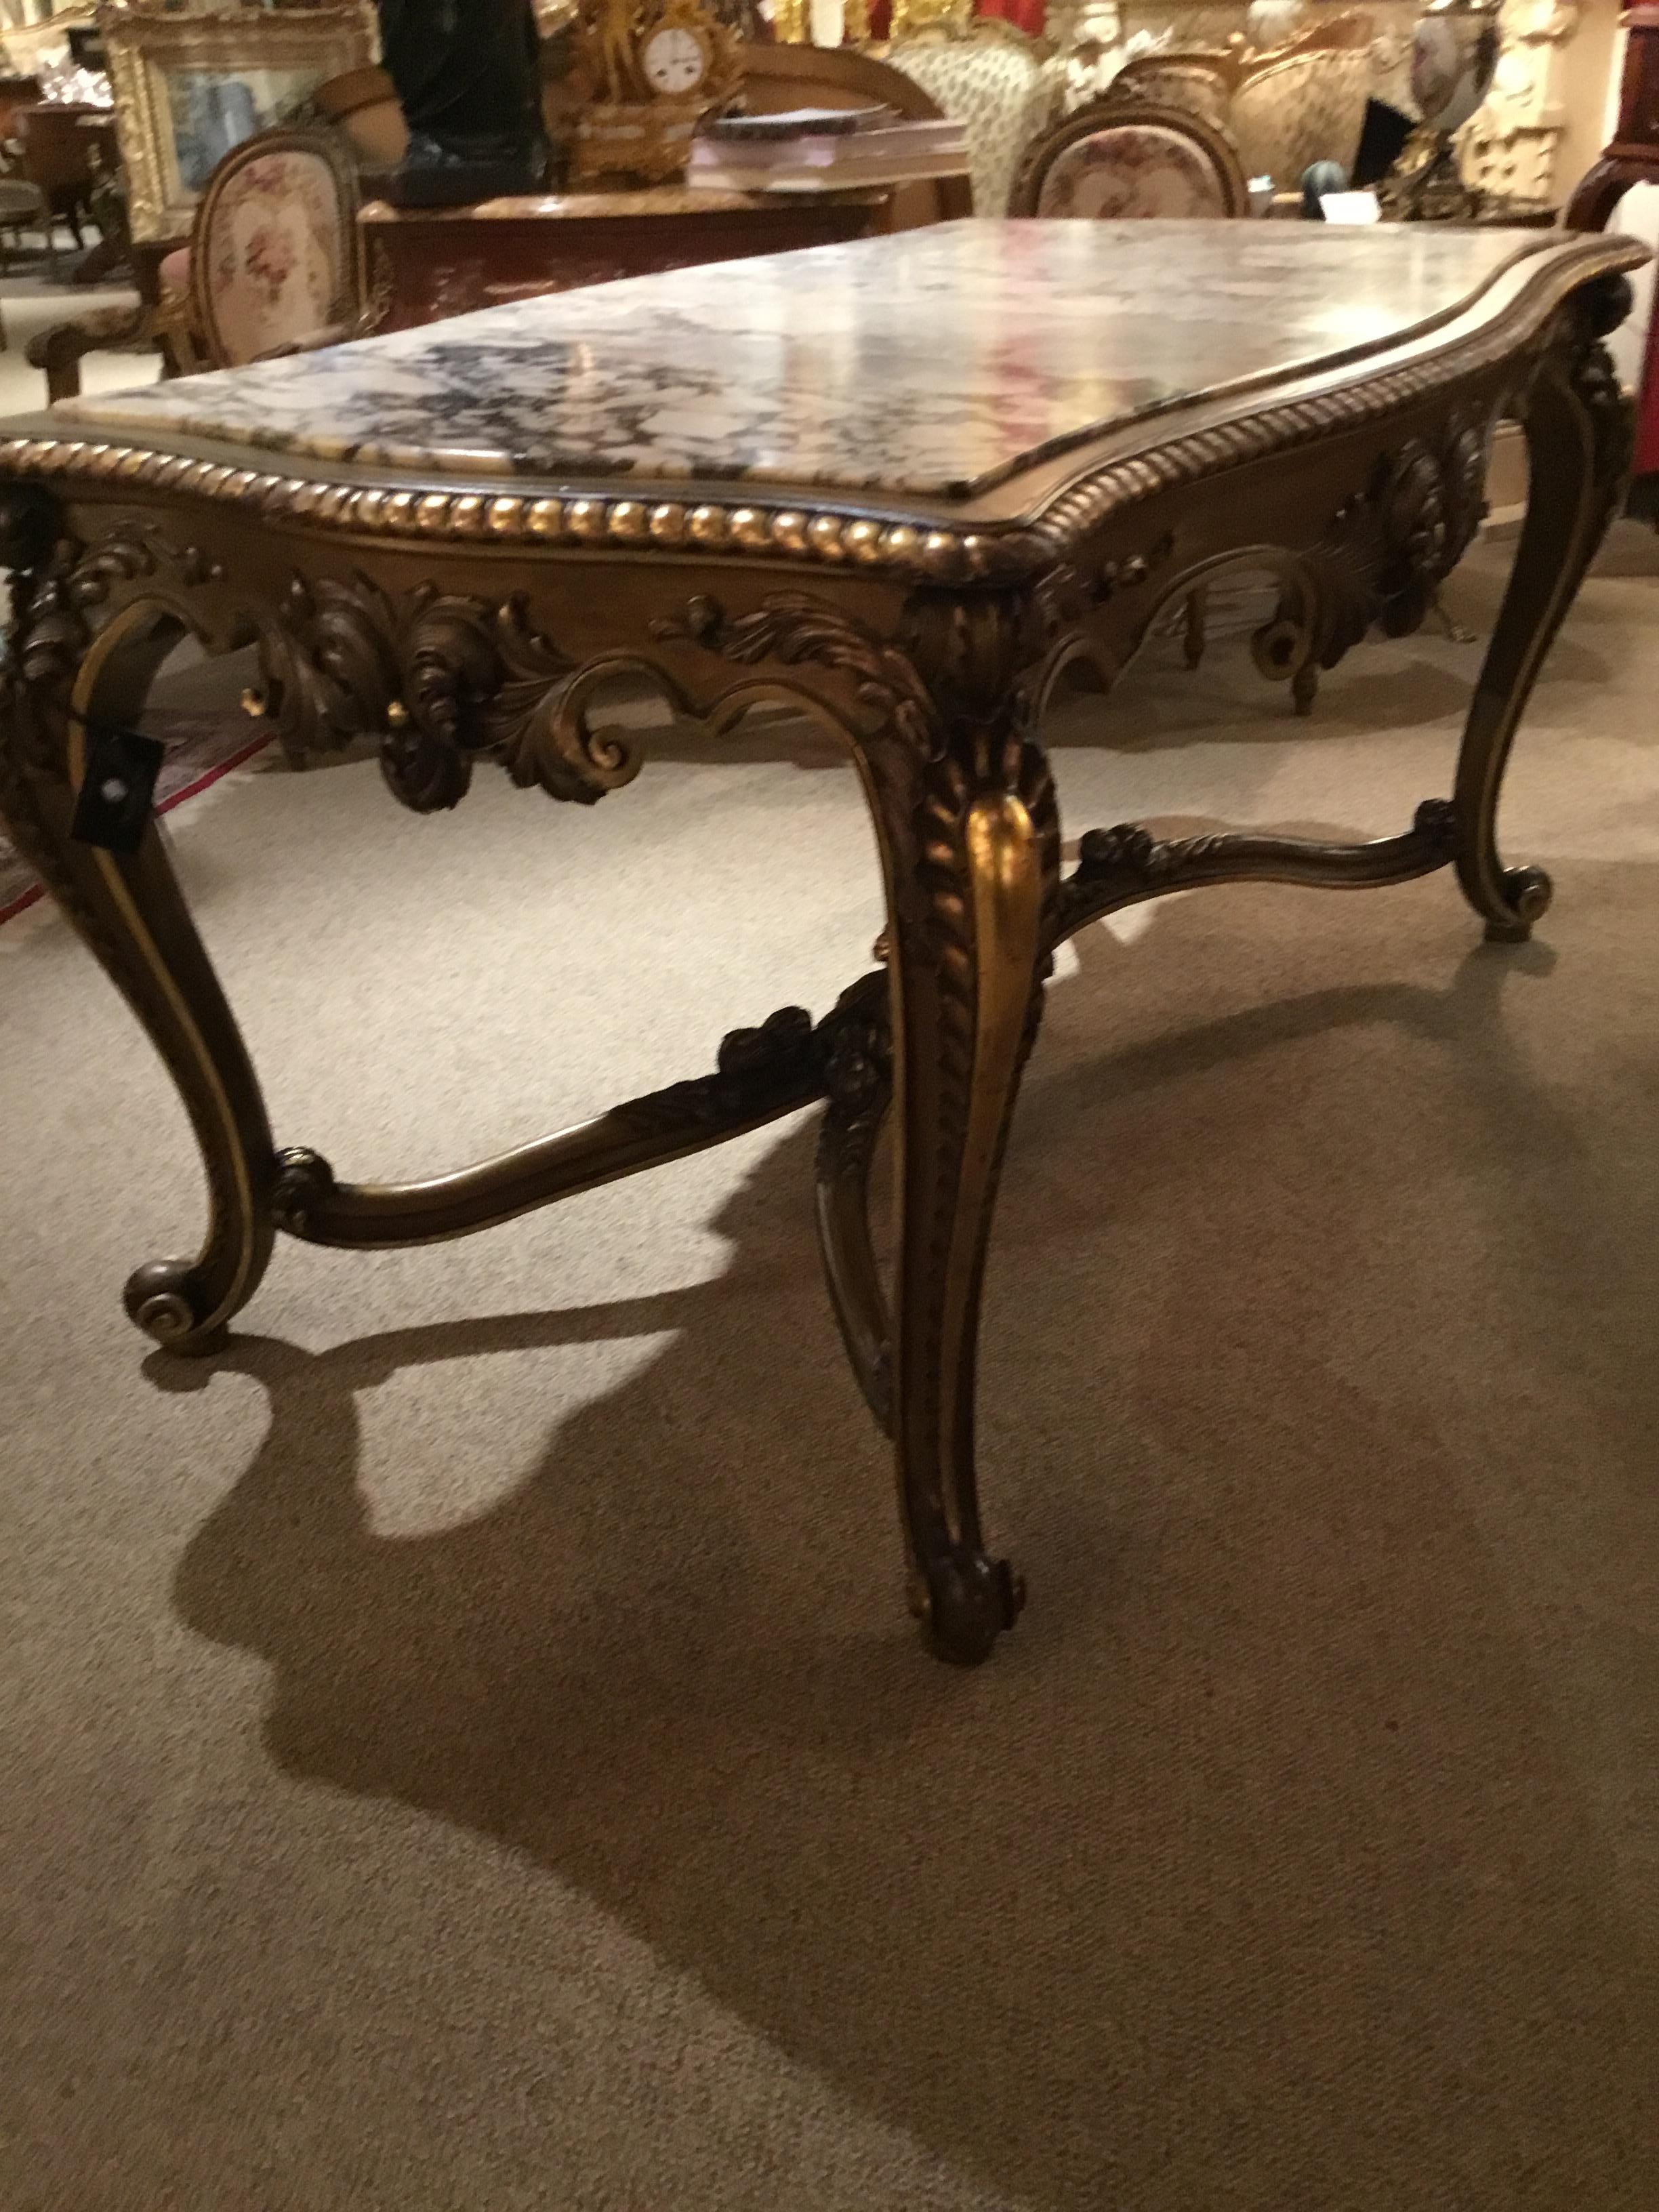 Center table in antique gilt wood with deep carving and a centered foliate scroll design across the front
Frieze and a bold curved leg with scallops down each leg. The elegant stretcher is curved and joins 
At the center with two embracing angels